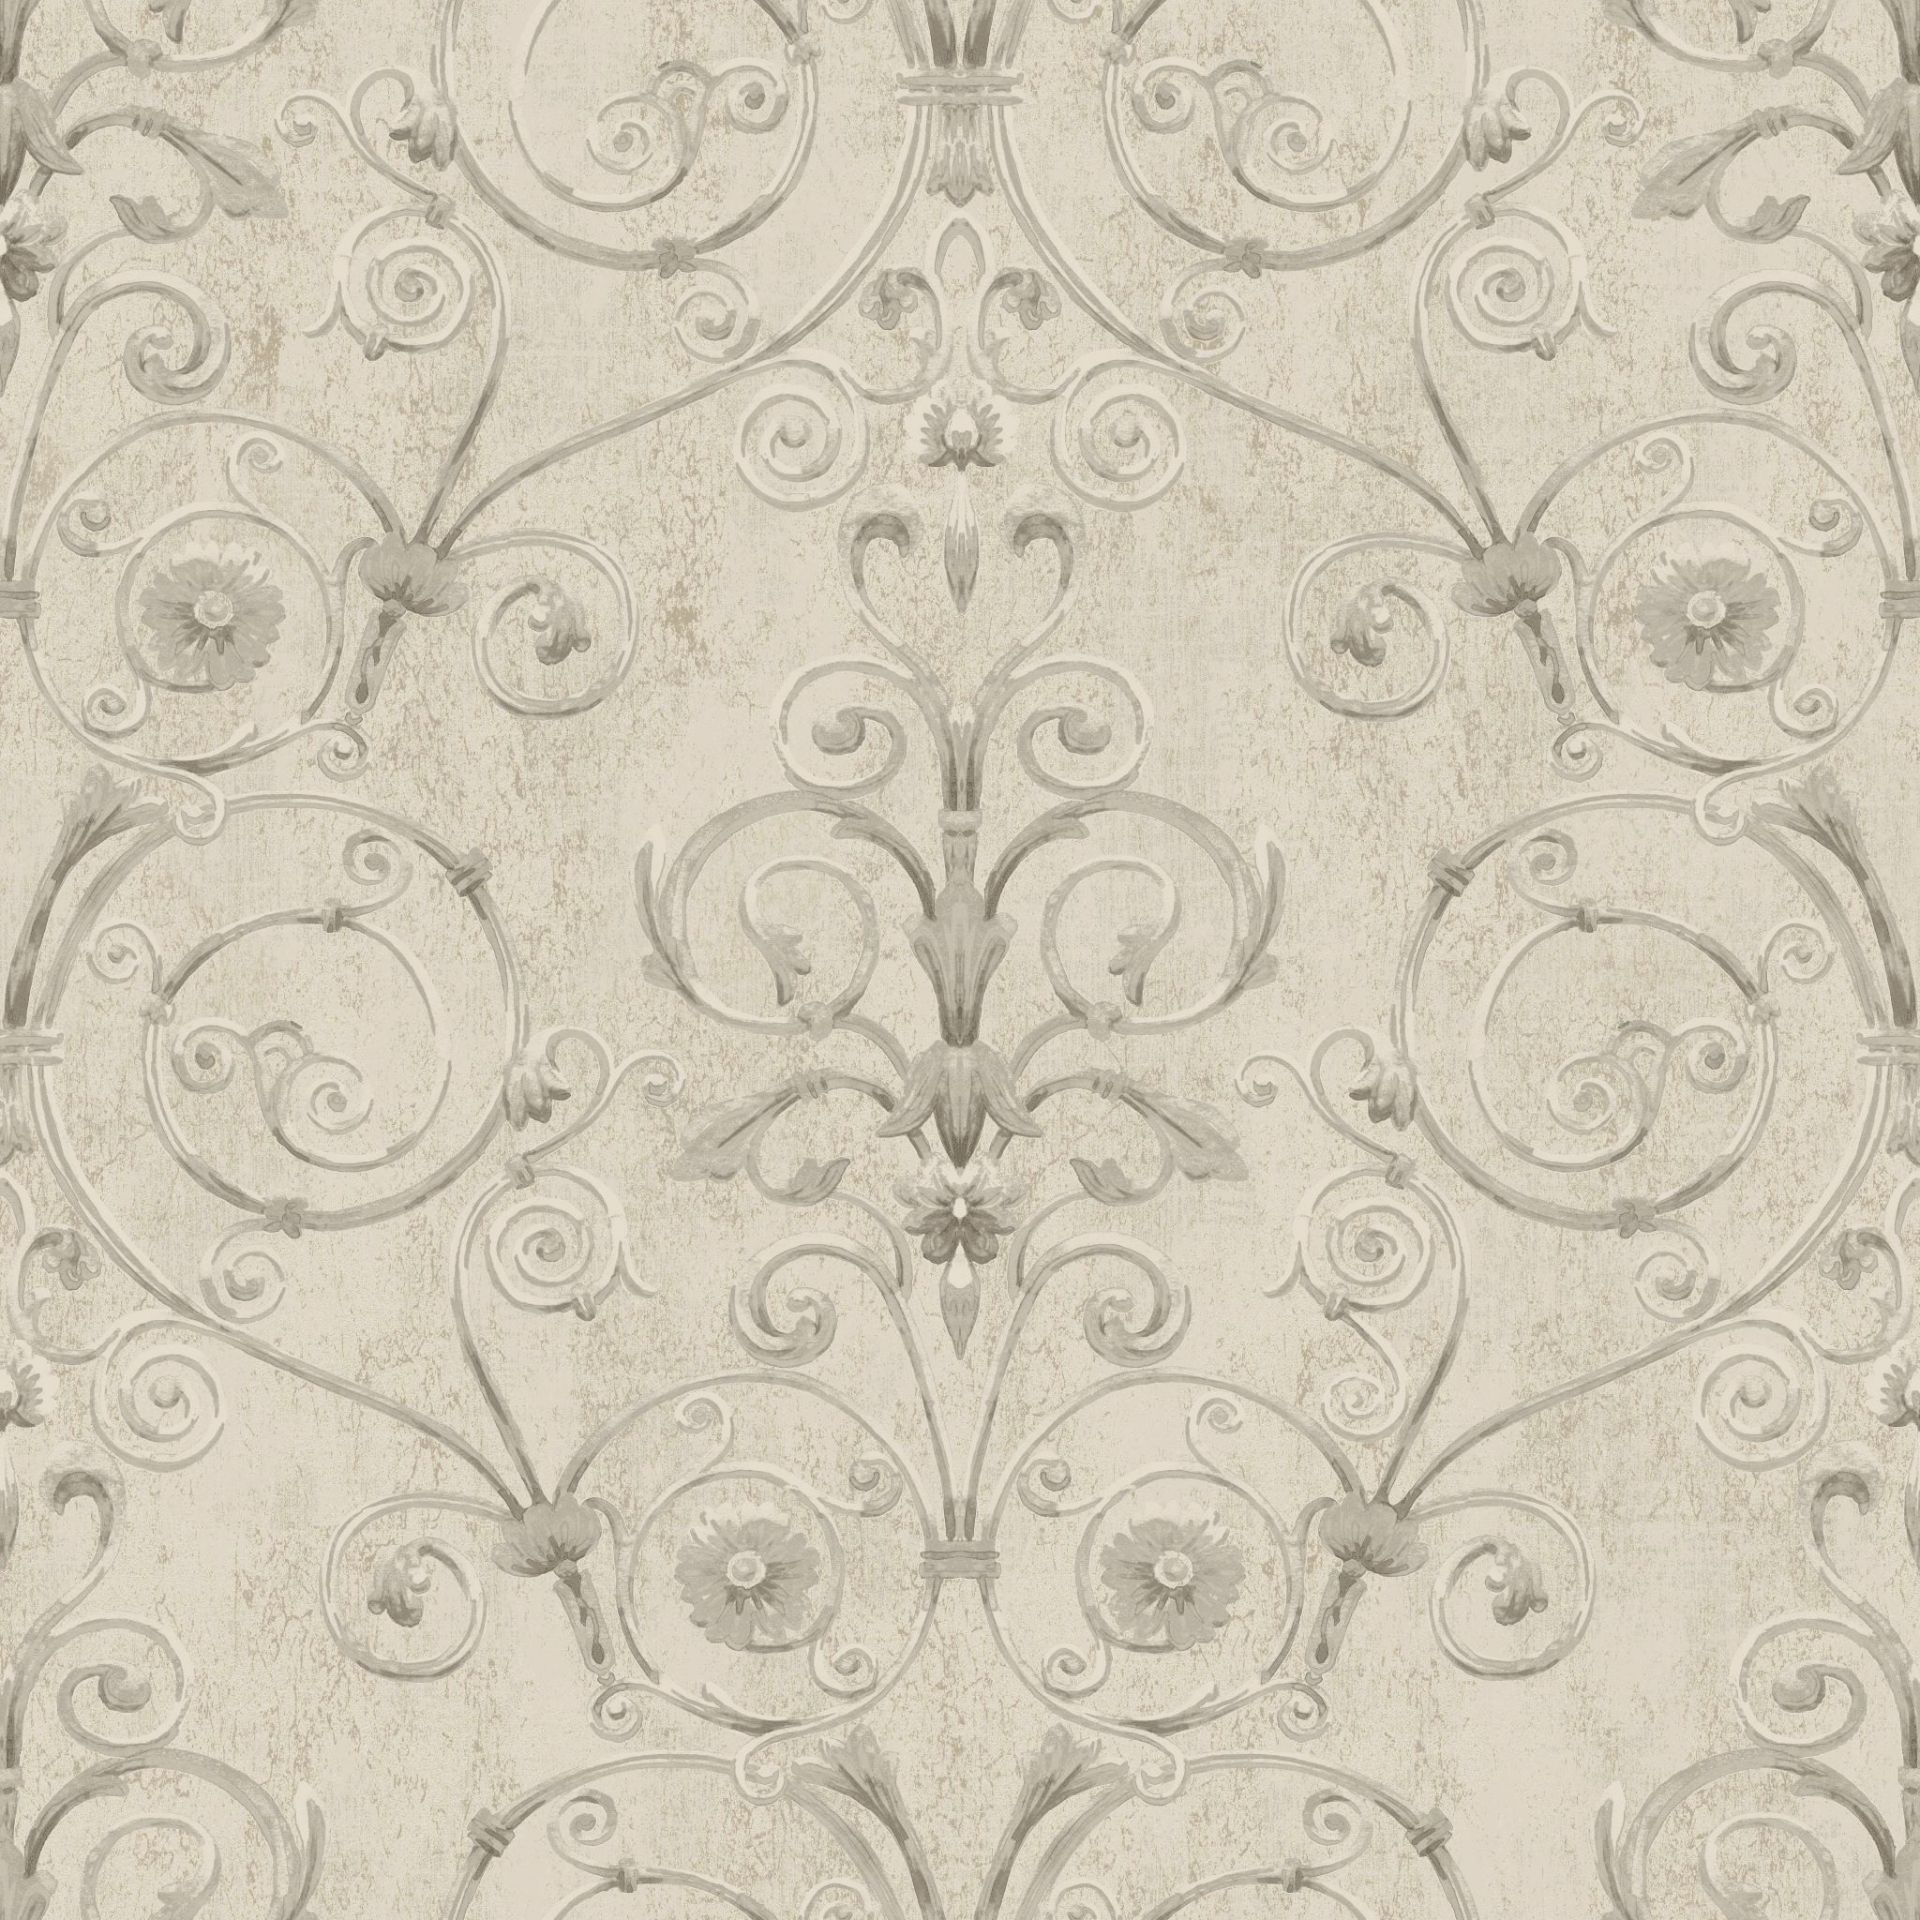 (45) Rolls of University of Oxford wallpaper - Curlicue - Image 3 of 3